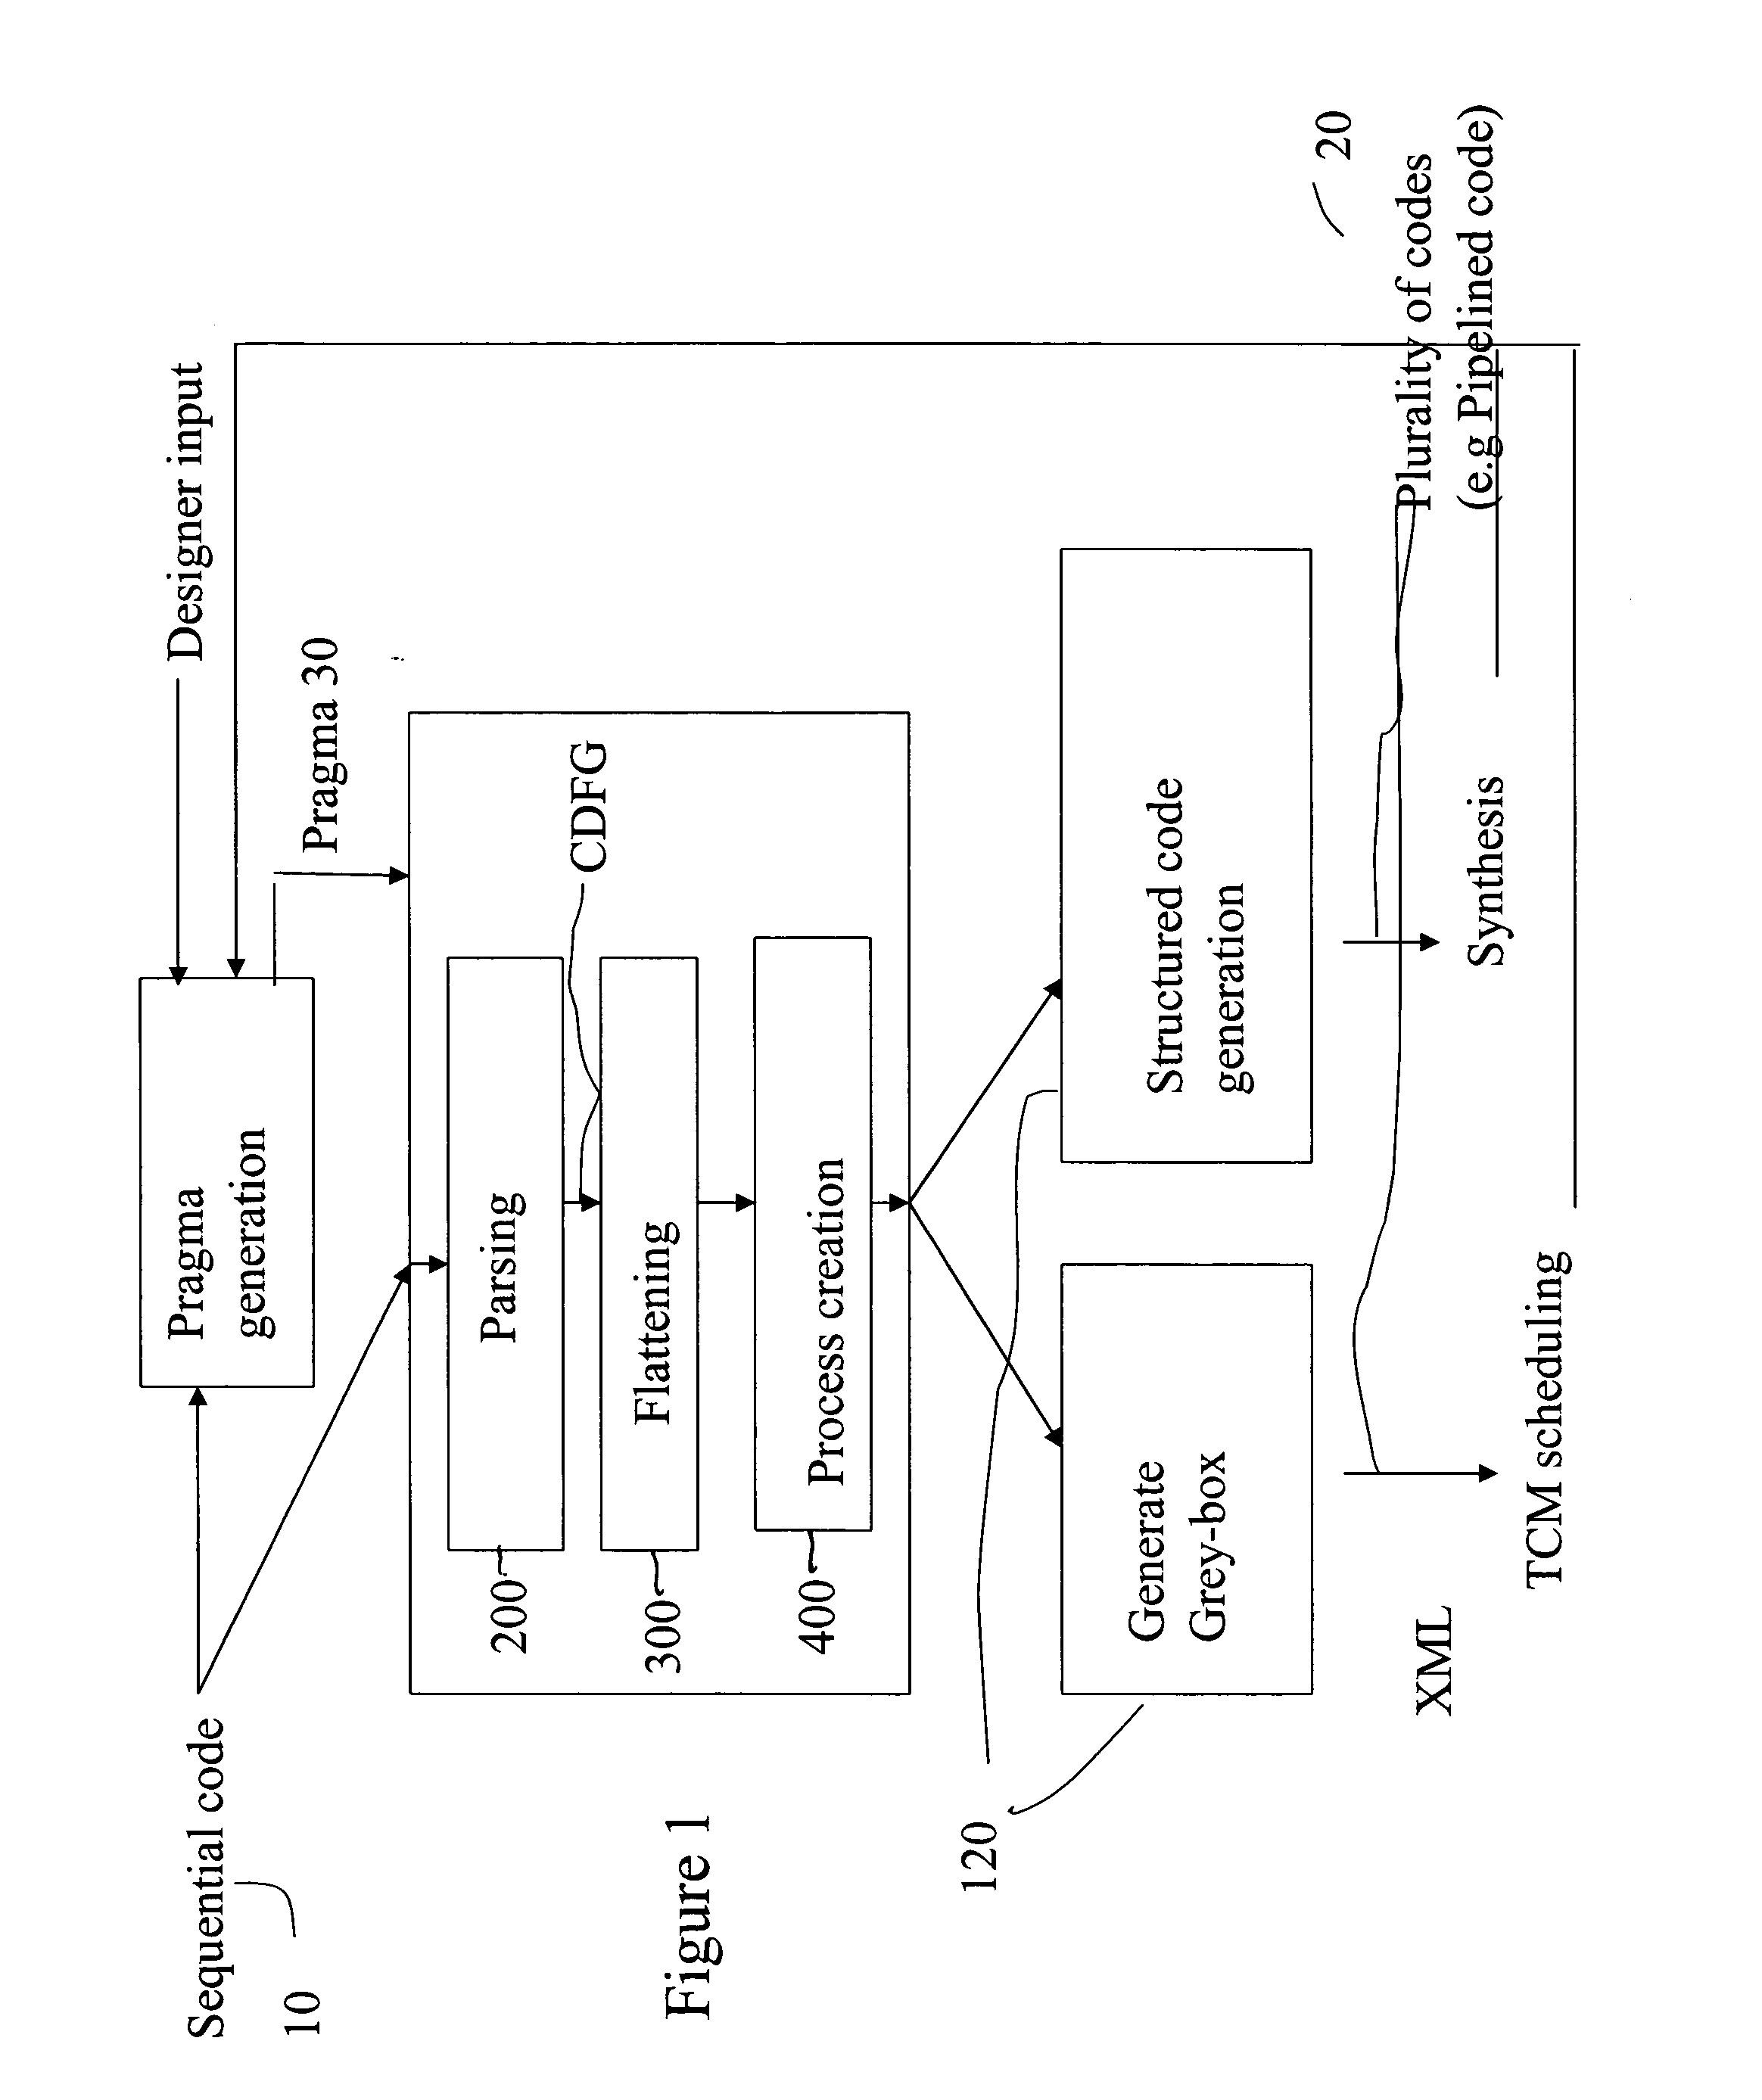 System and method for automatic parallelization of sequential code